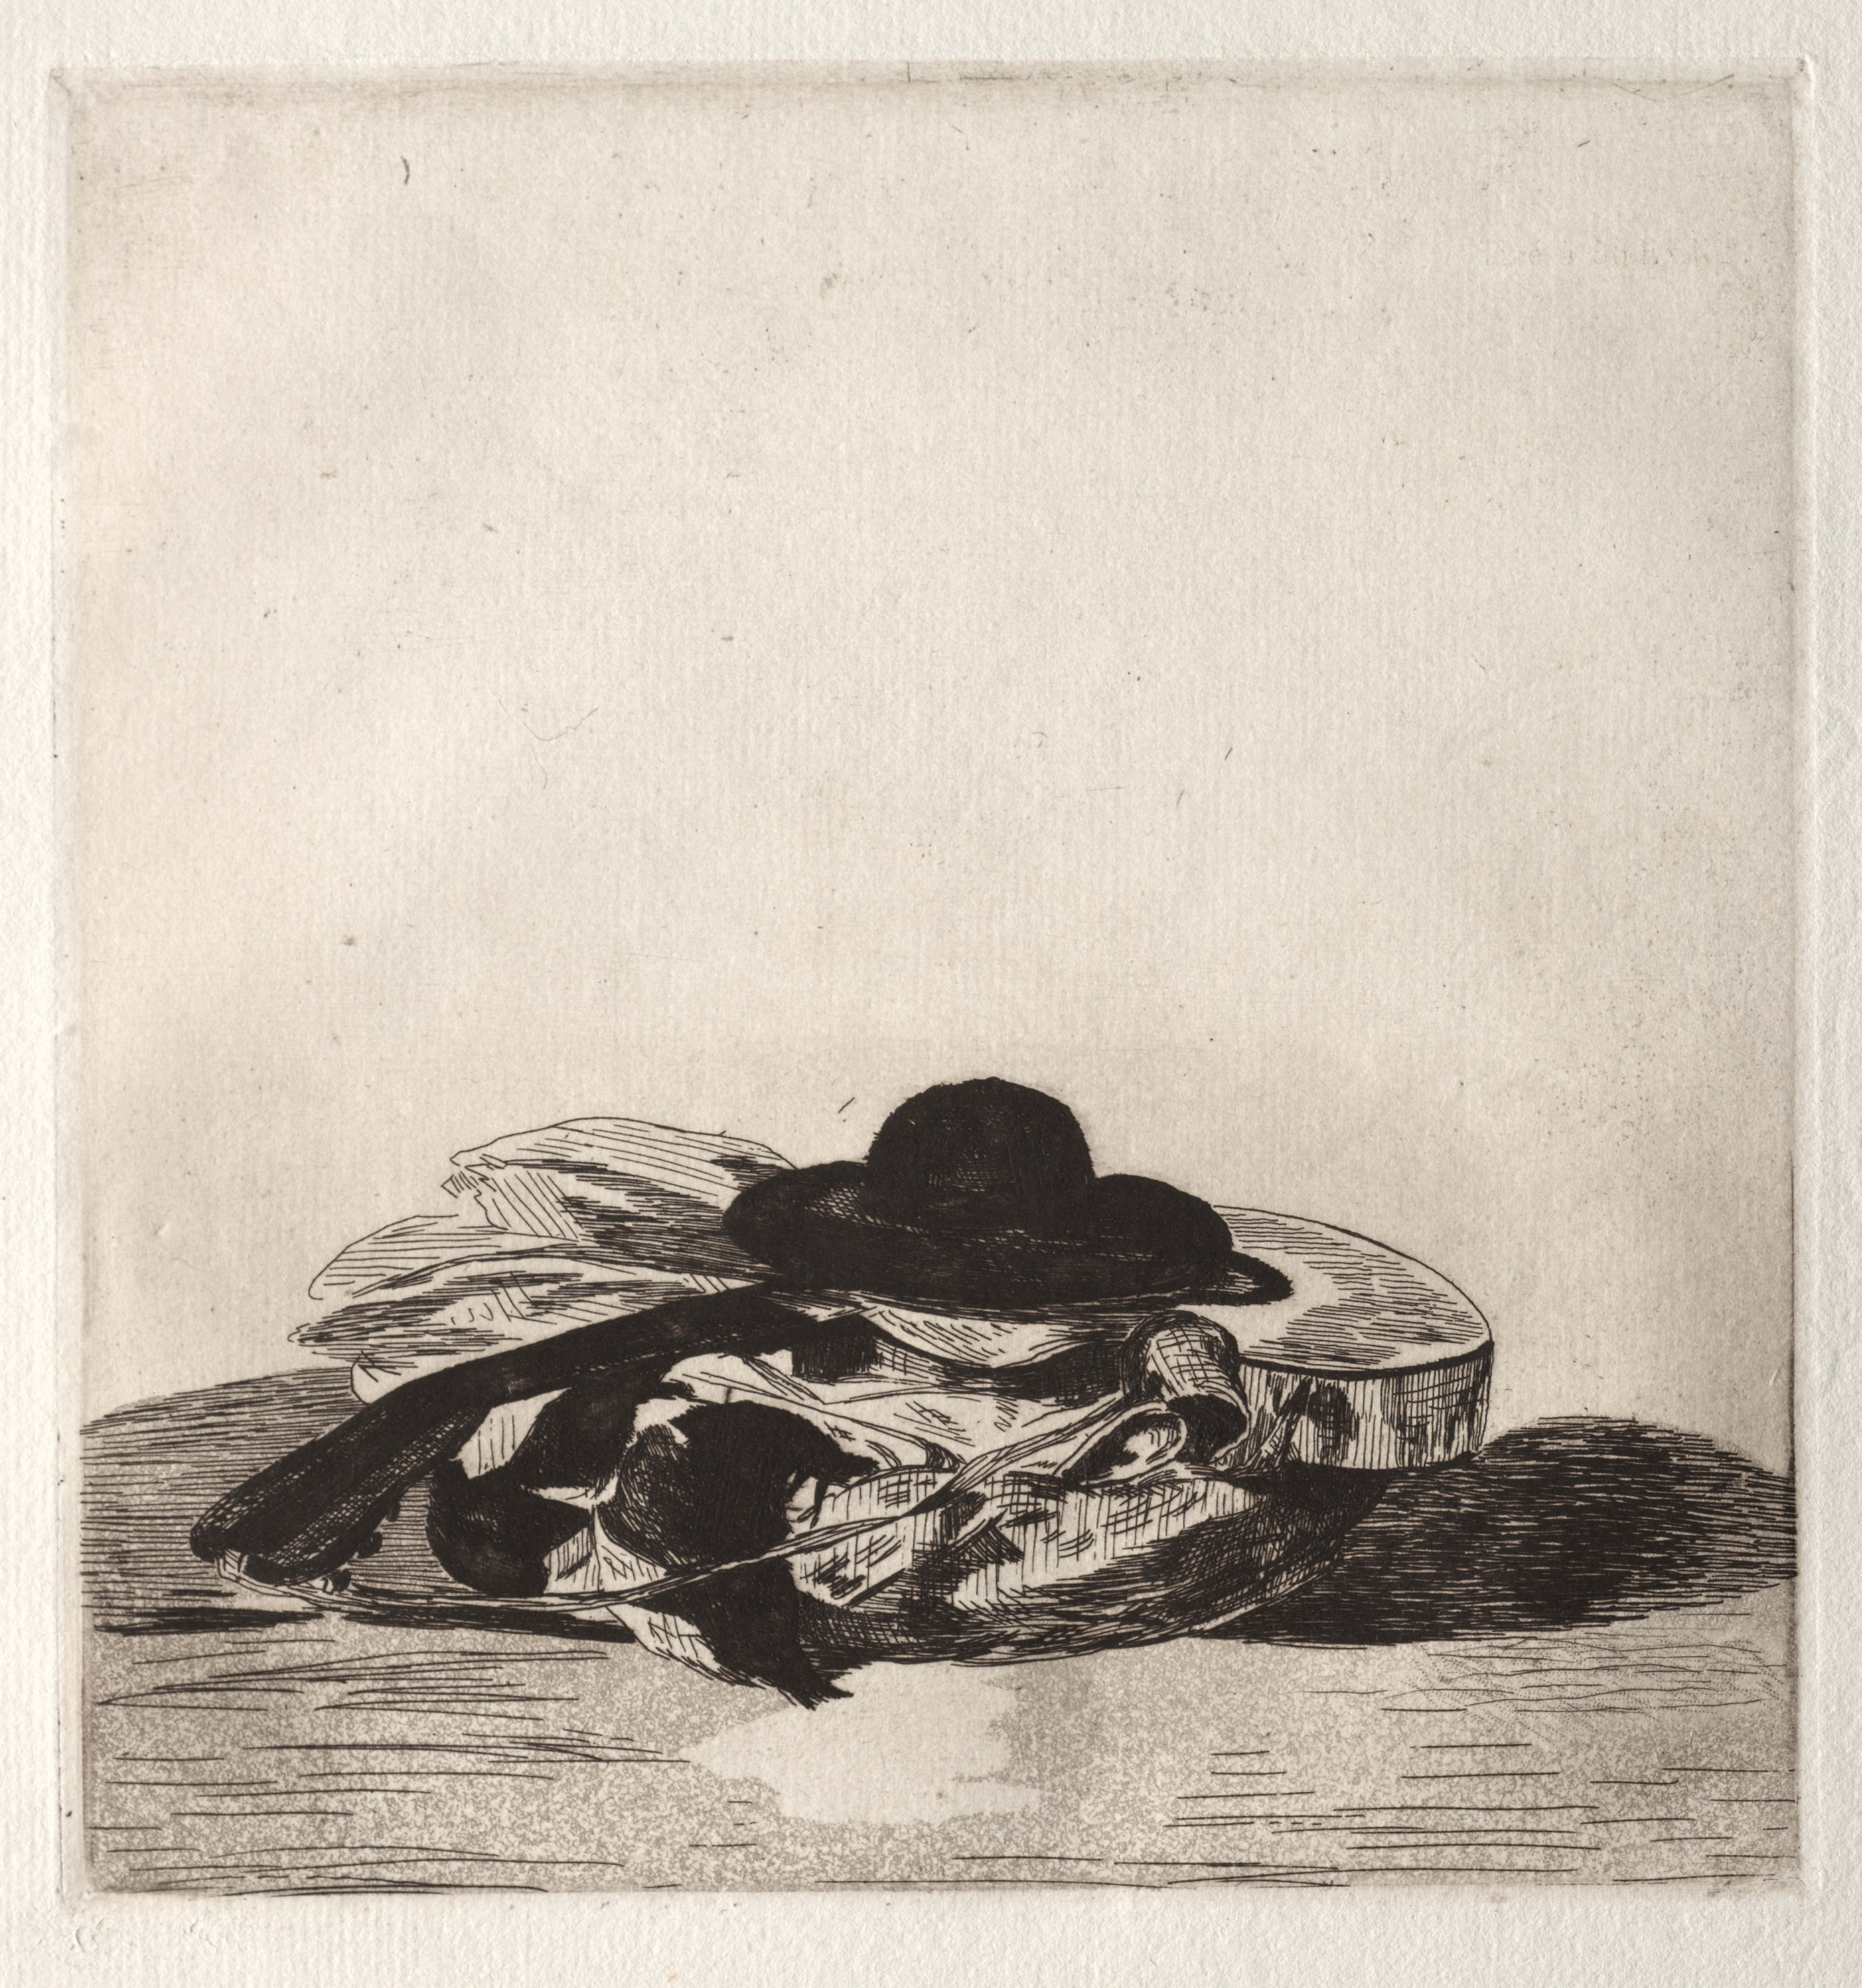 Fronttispiece for an Edition of Etchings: Hat and Guitar